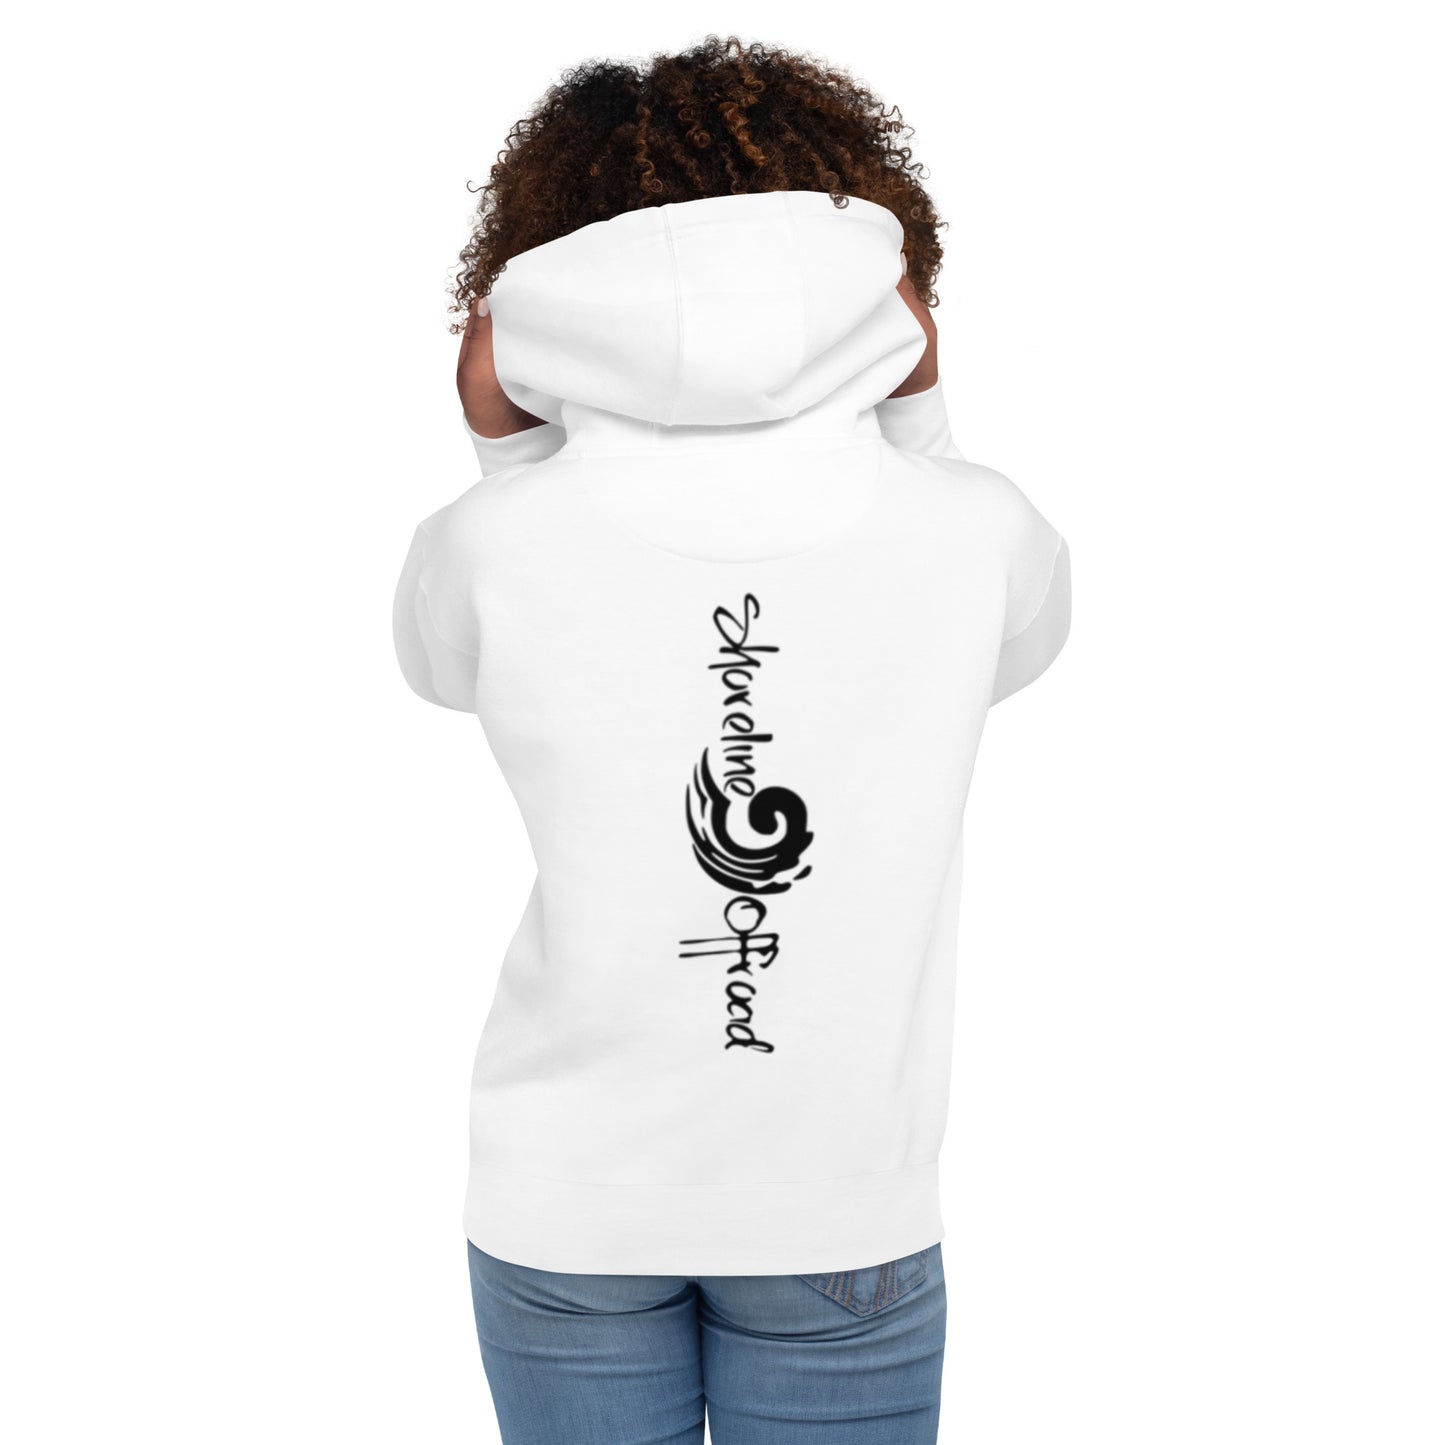 a woman wearing a white hoodie with a black design on it